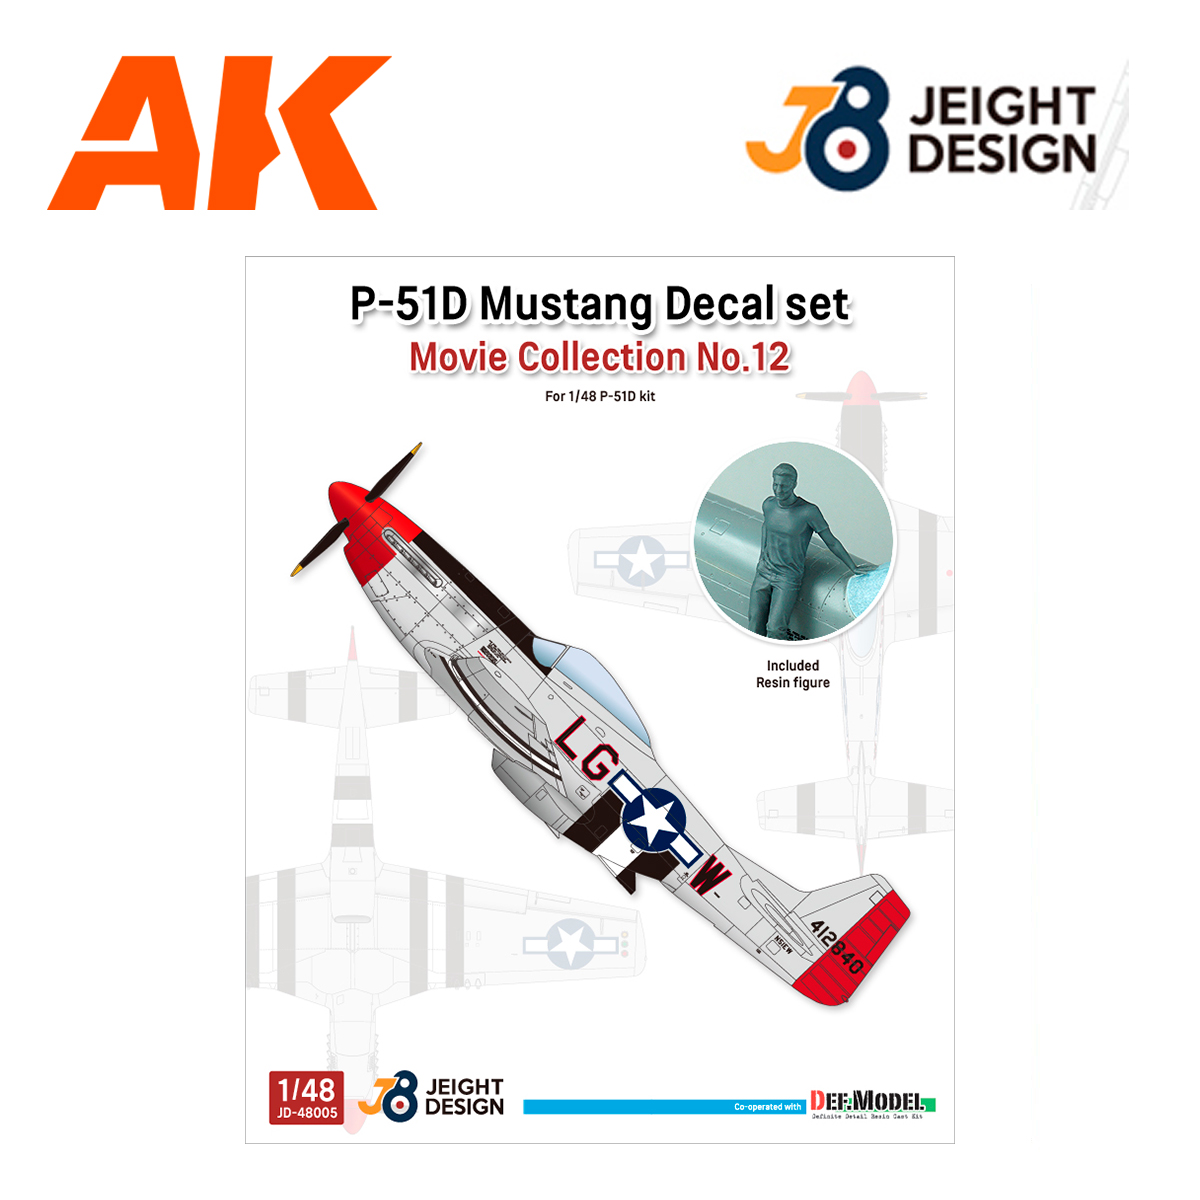 P-51D Mustang Decal / PE set w/ 1 figure  Movie Collection No.12 (for Tamiya, Etc kit)